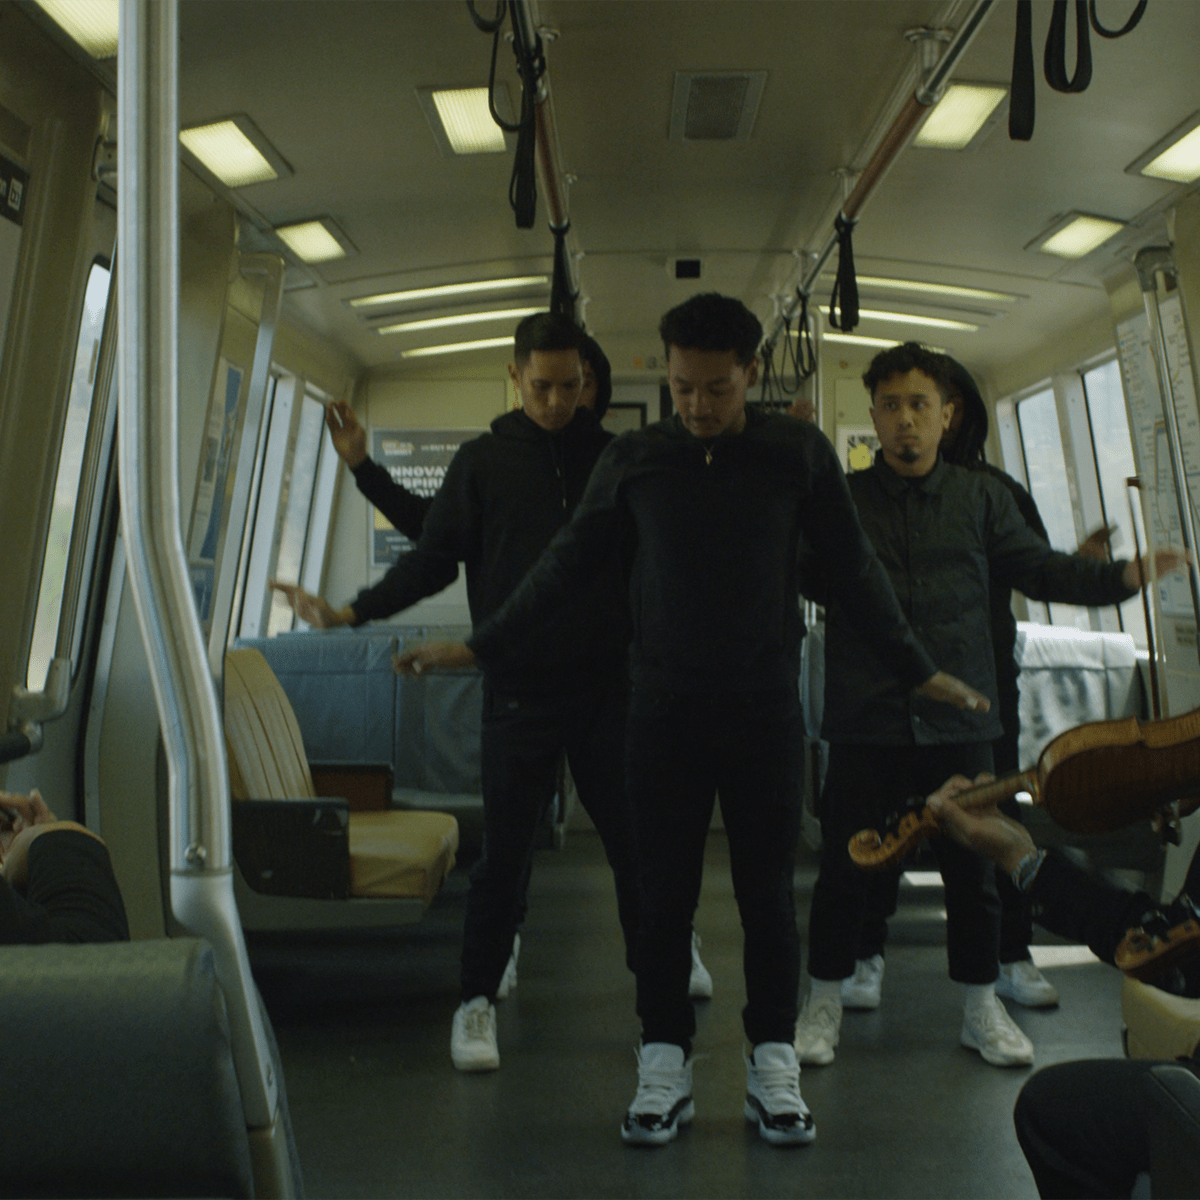 three people dance on a train filled with commuters